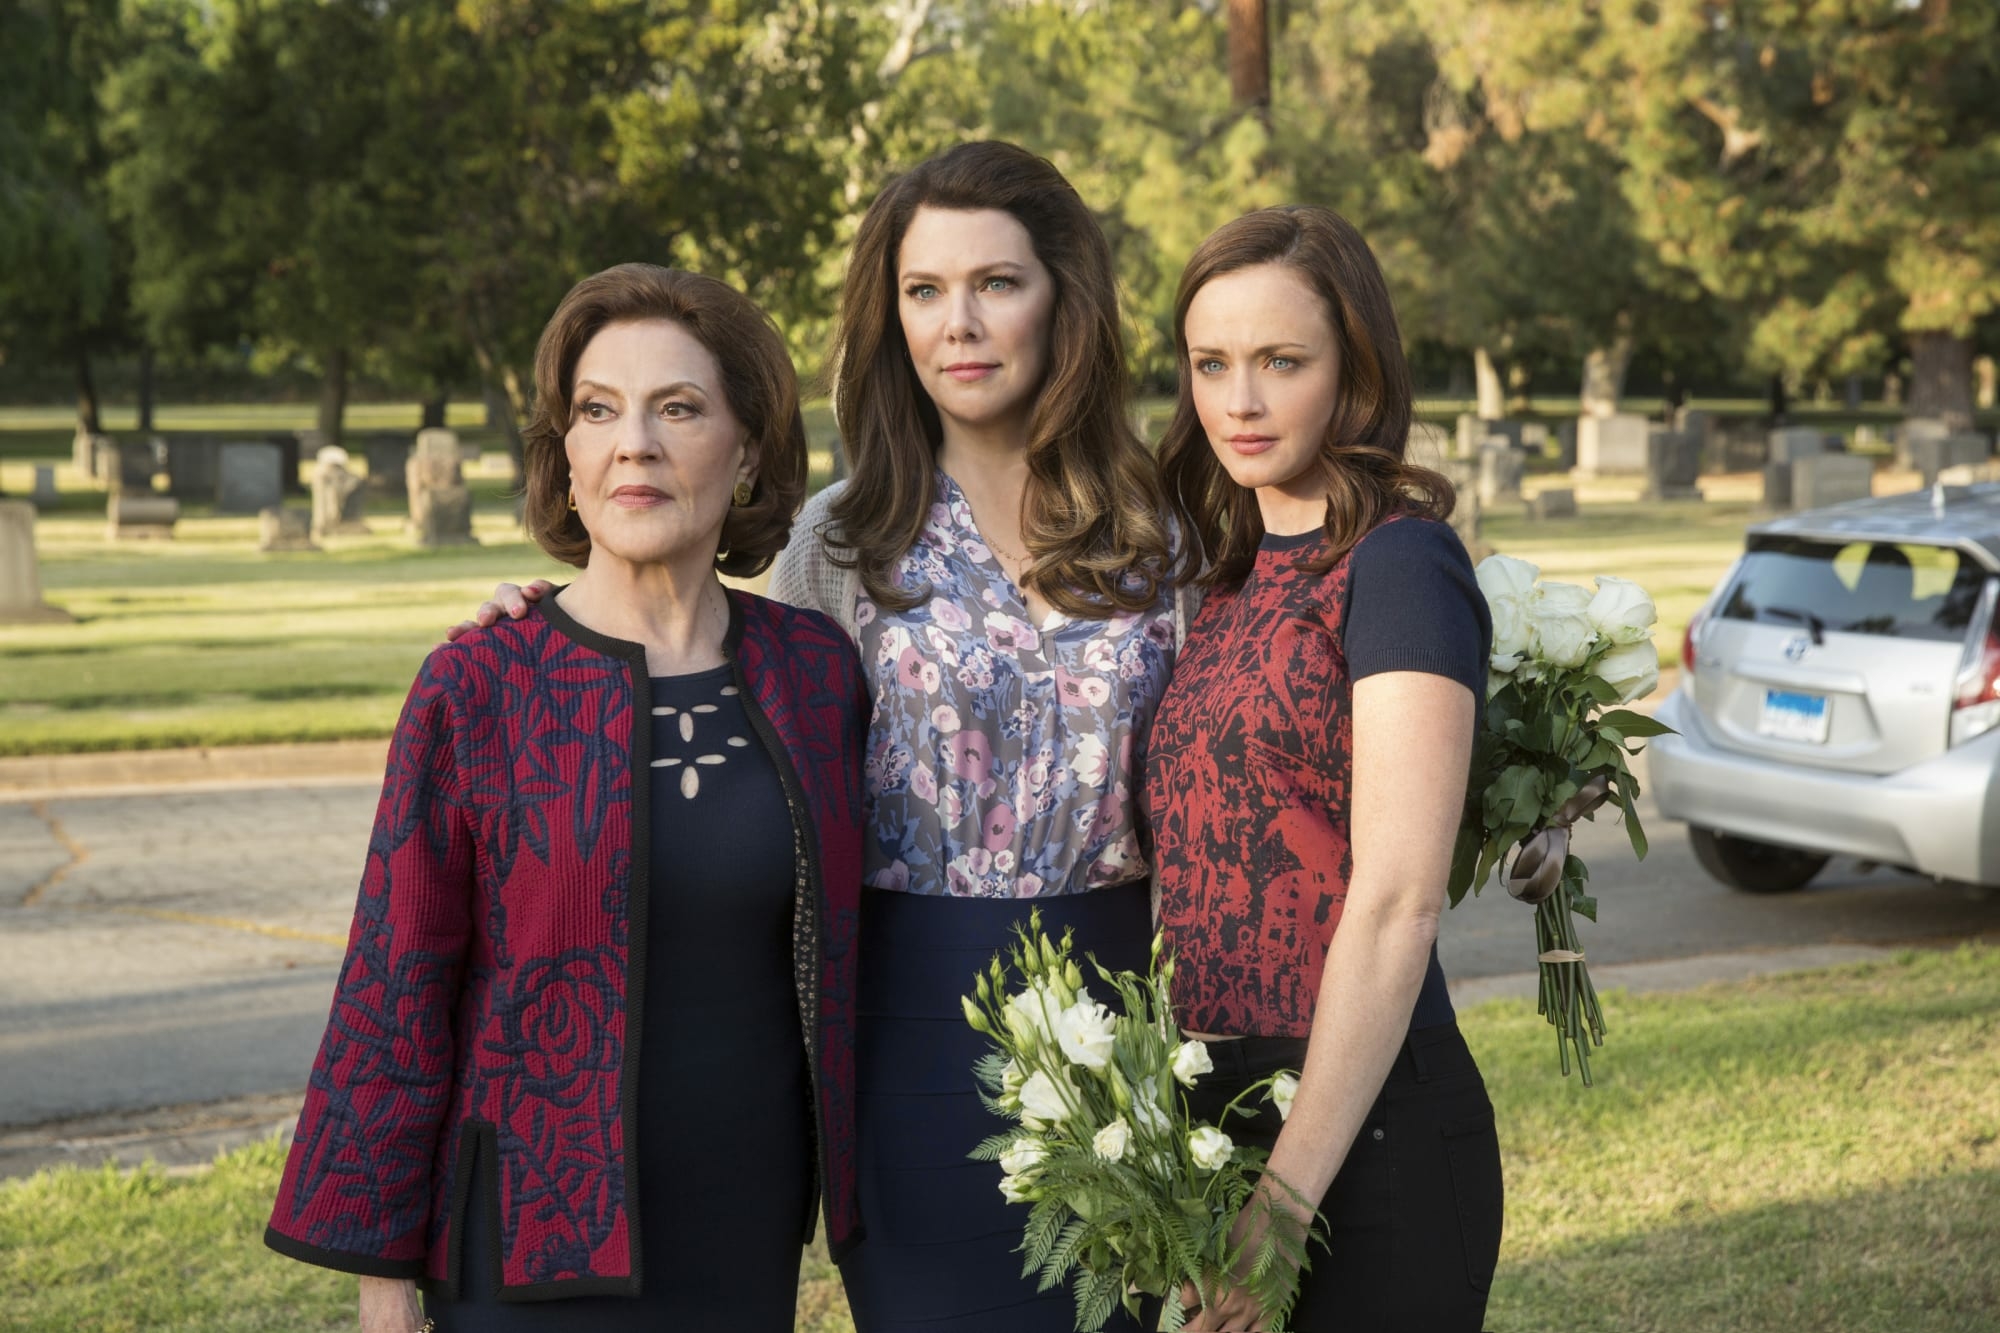 When will 'Gilmore Girls' leave Netflix?